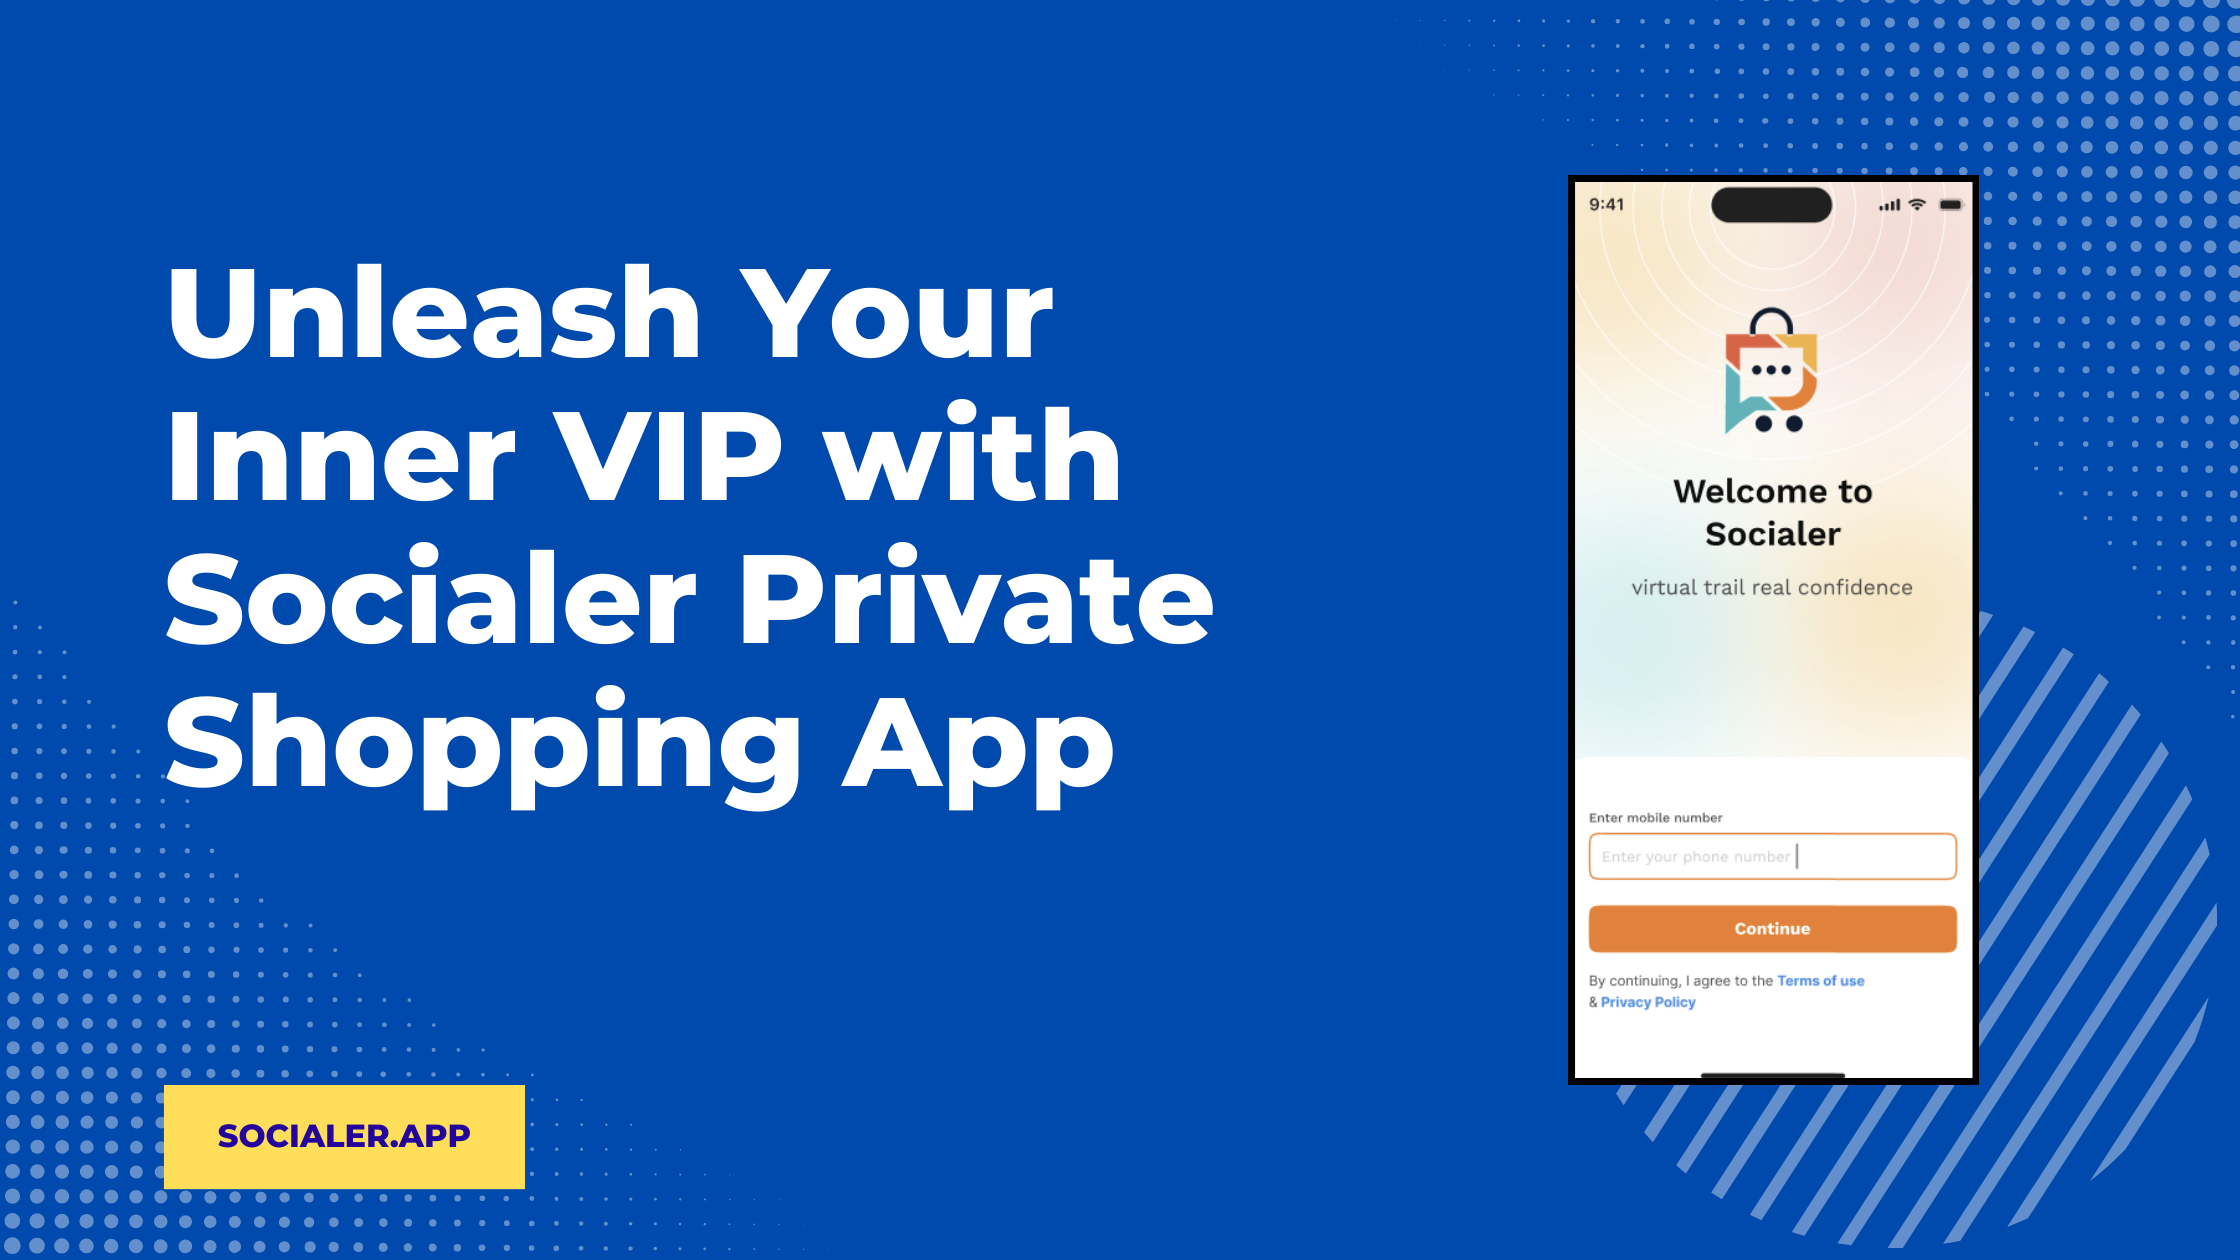 Unleash Your Inner VIP with Socialer Private Shopping App